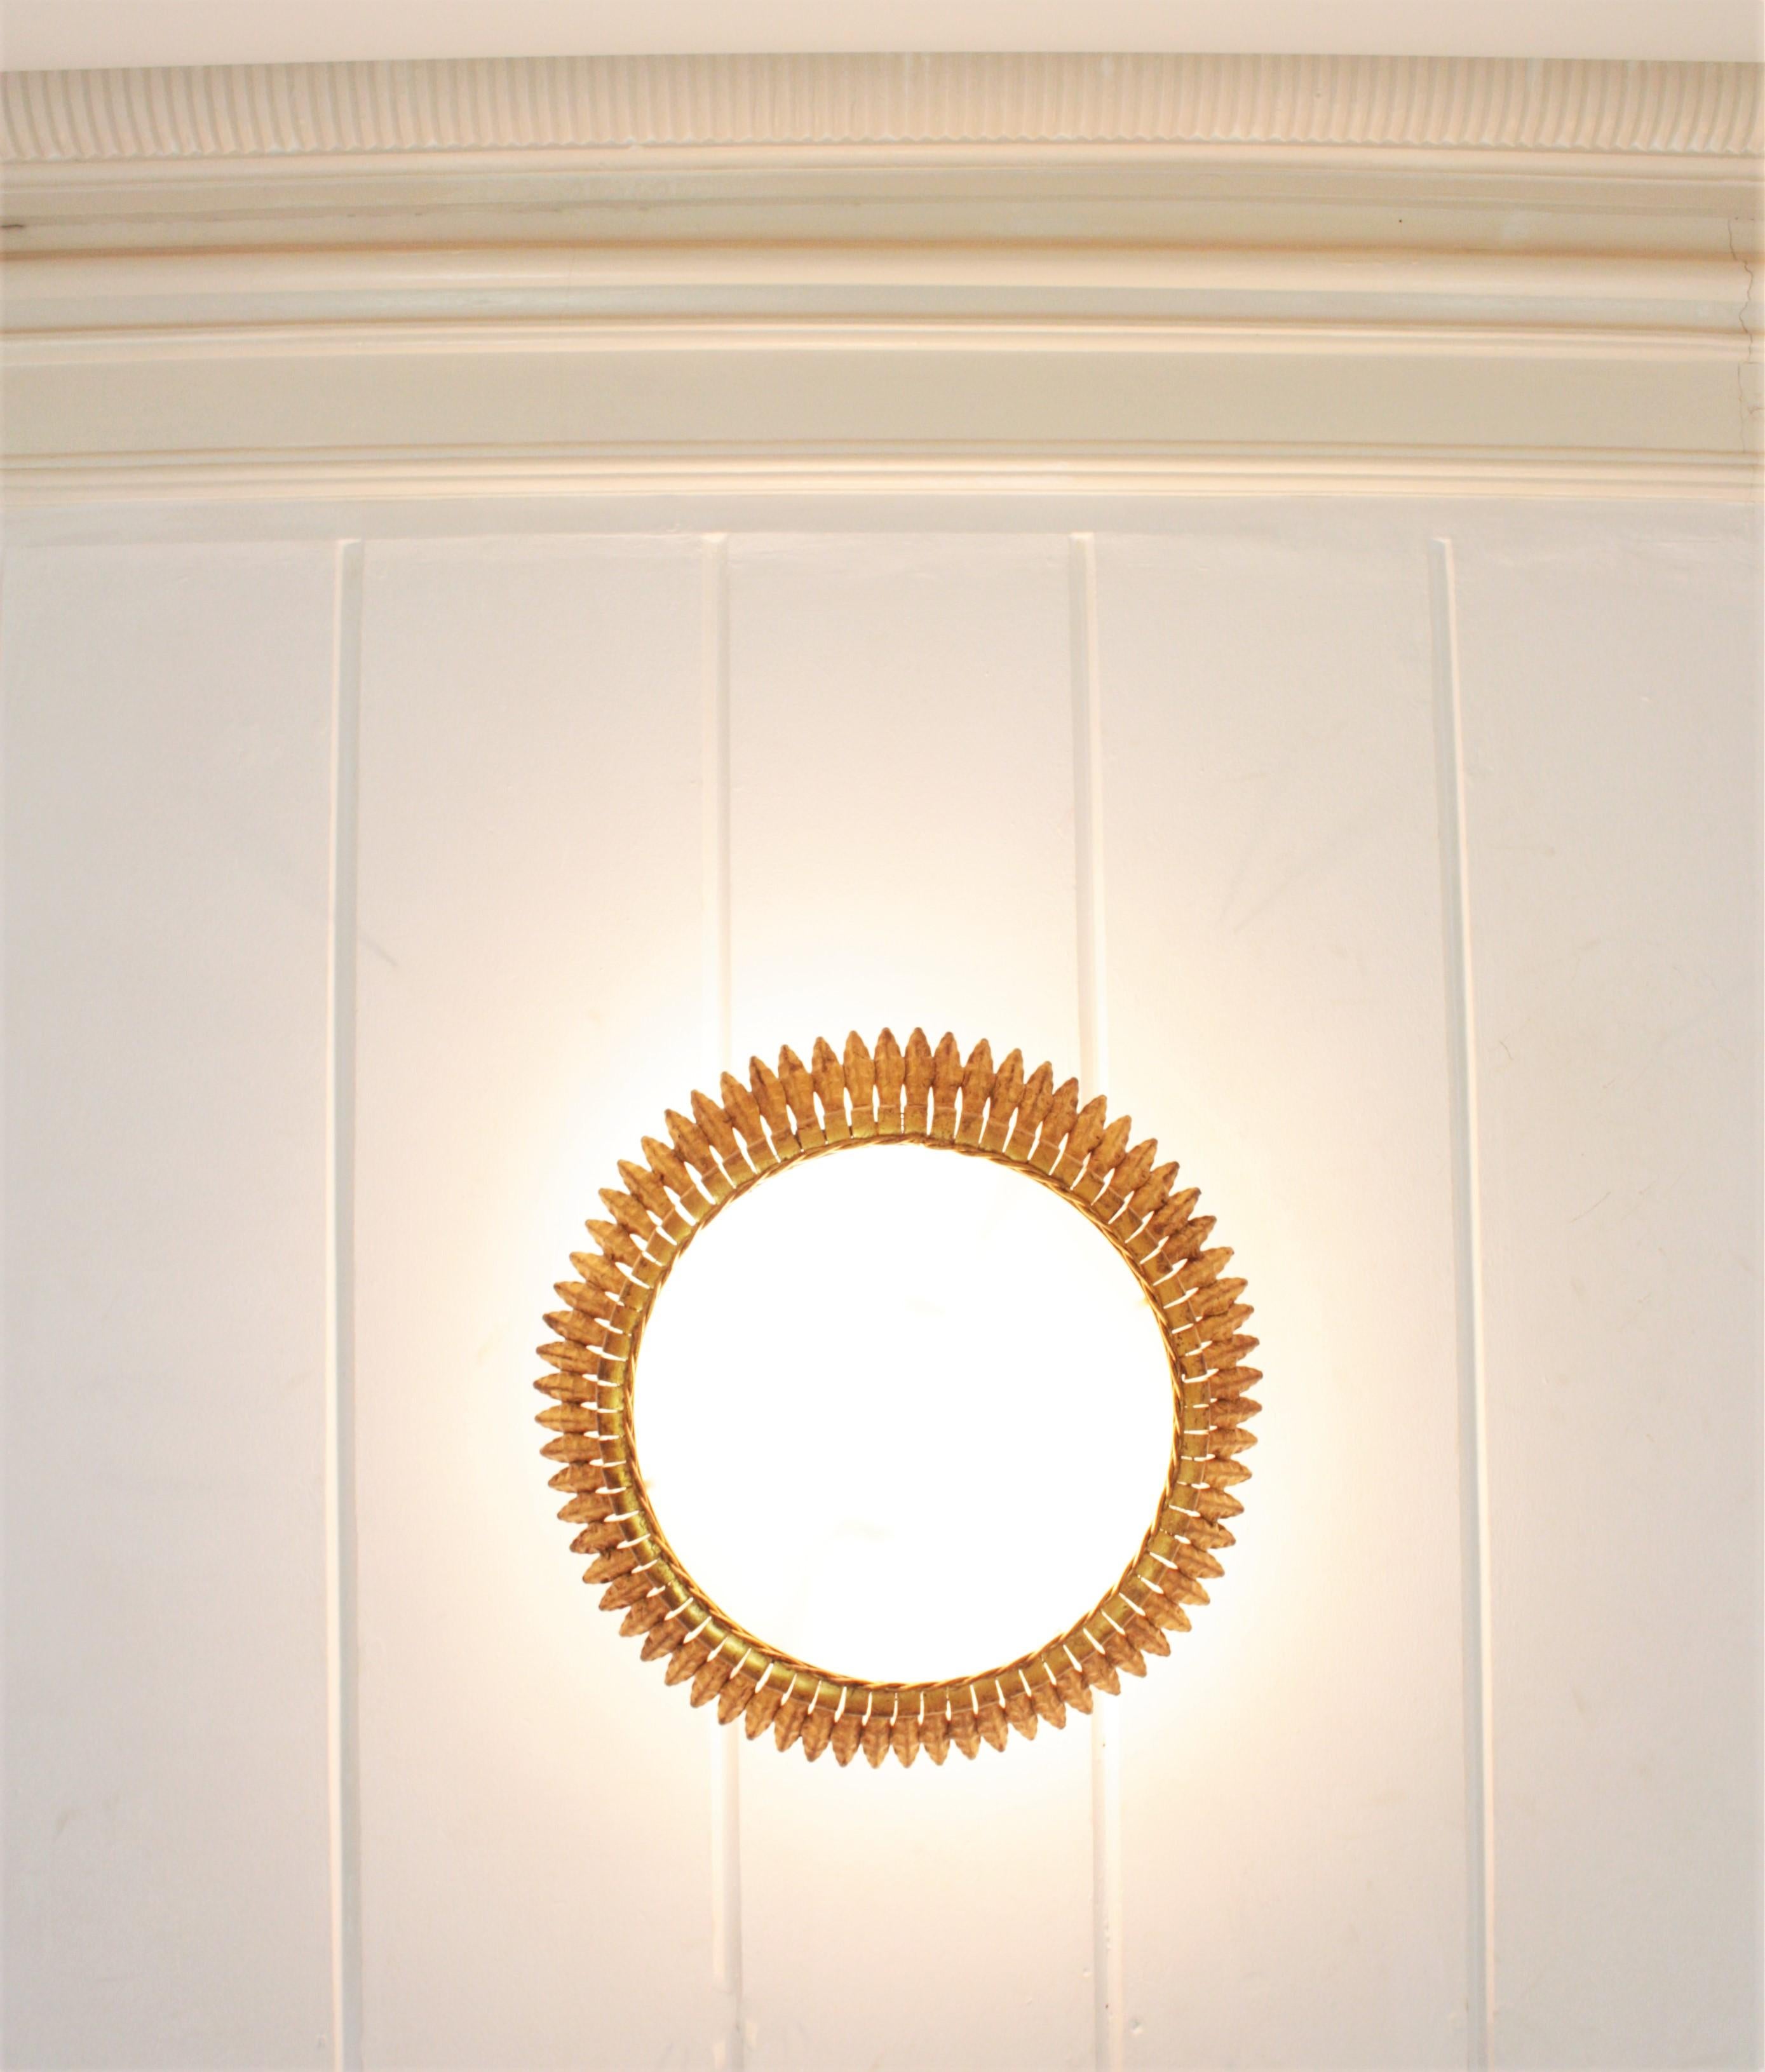 Large Spanish Gilt Metal Crown Sunburst Leafed Light Fixture with Frosted Glass 7